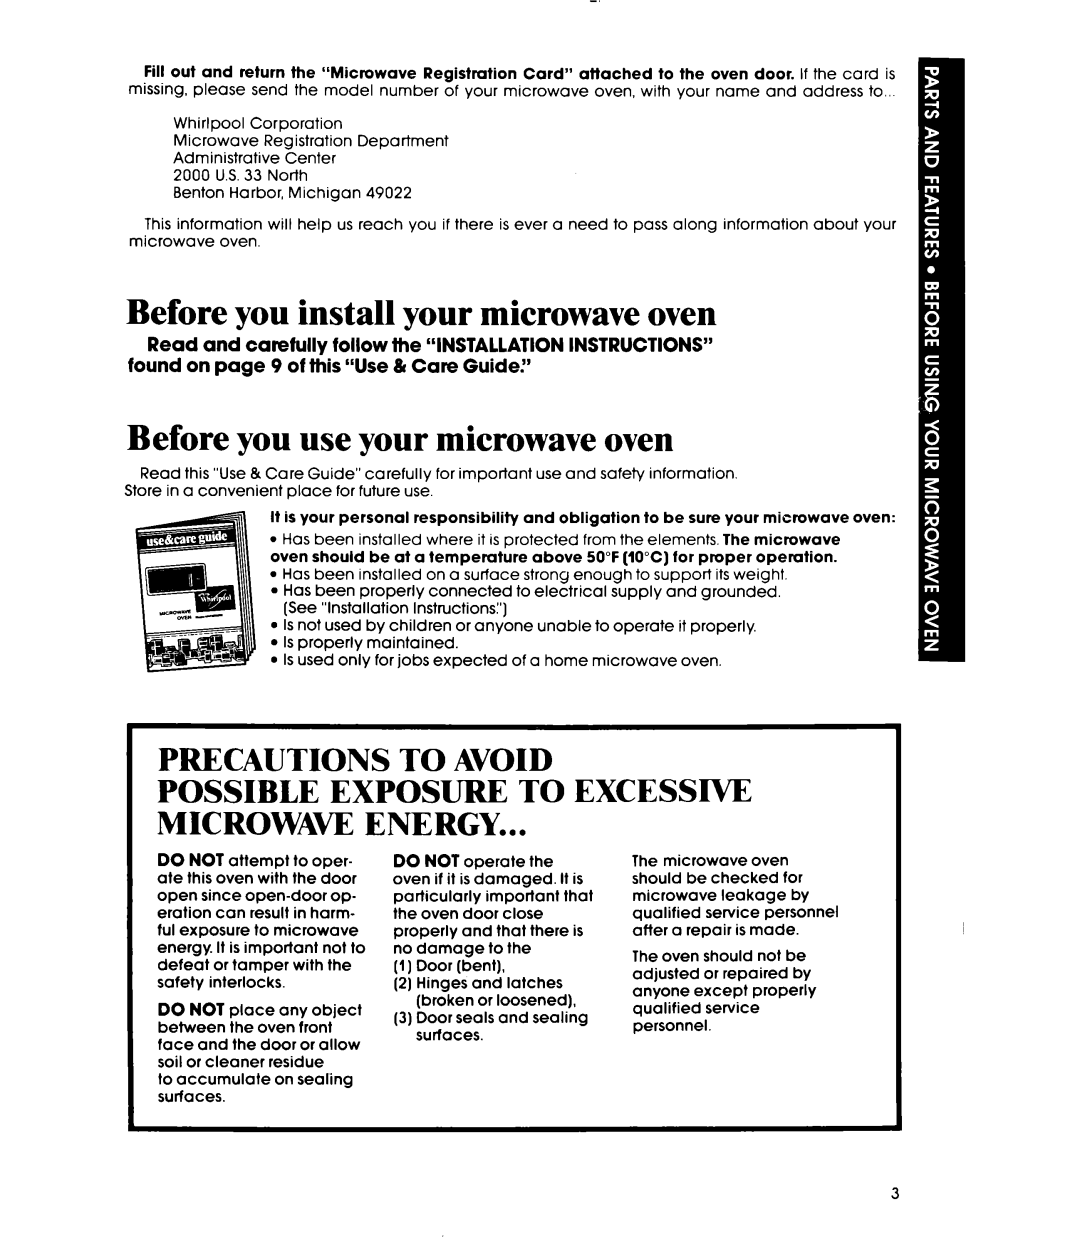 Whirlpool MW1000XP manual Before you install your microwave oven, Before you use your microwave oven, Precautions To Avoid 